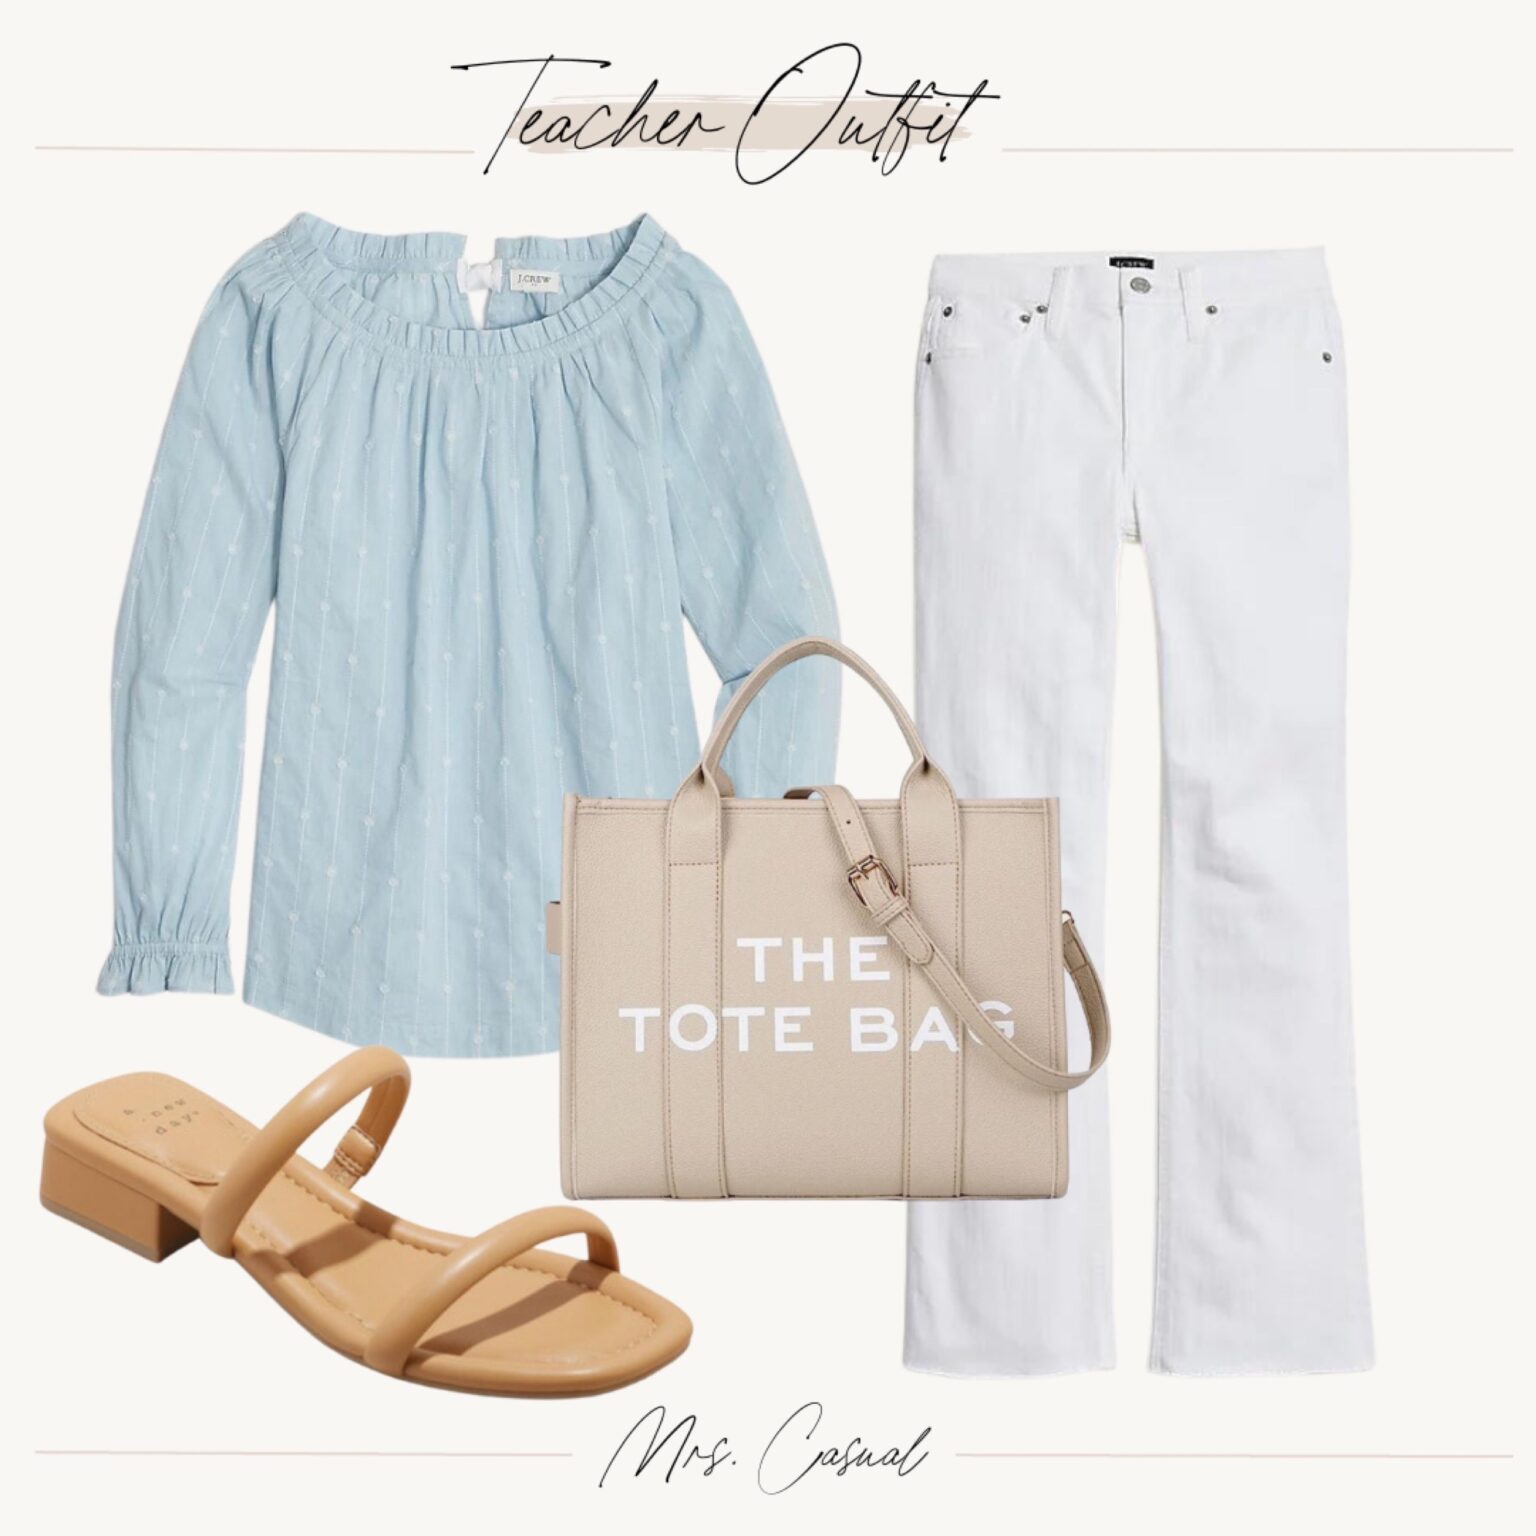 Week's Worth of MrsCasual Teacher Outfit Ideas | MrsCasual